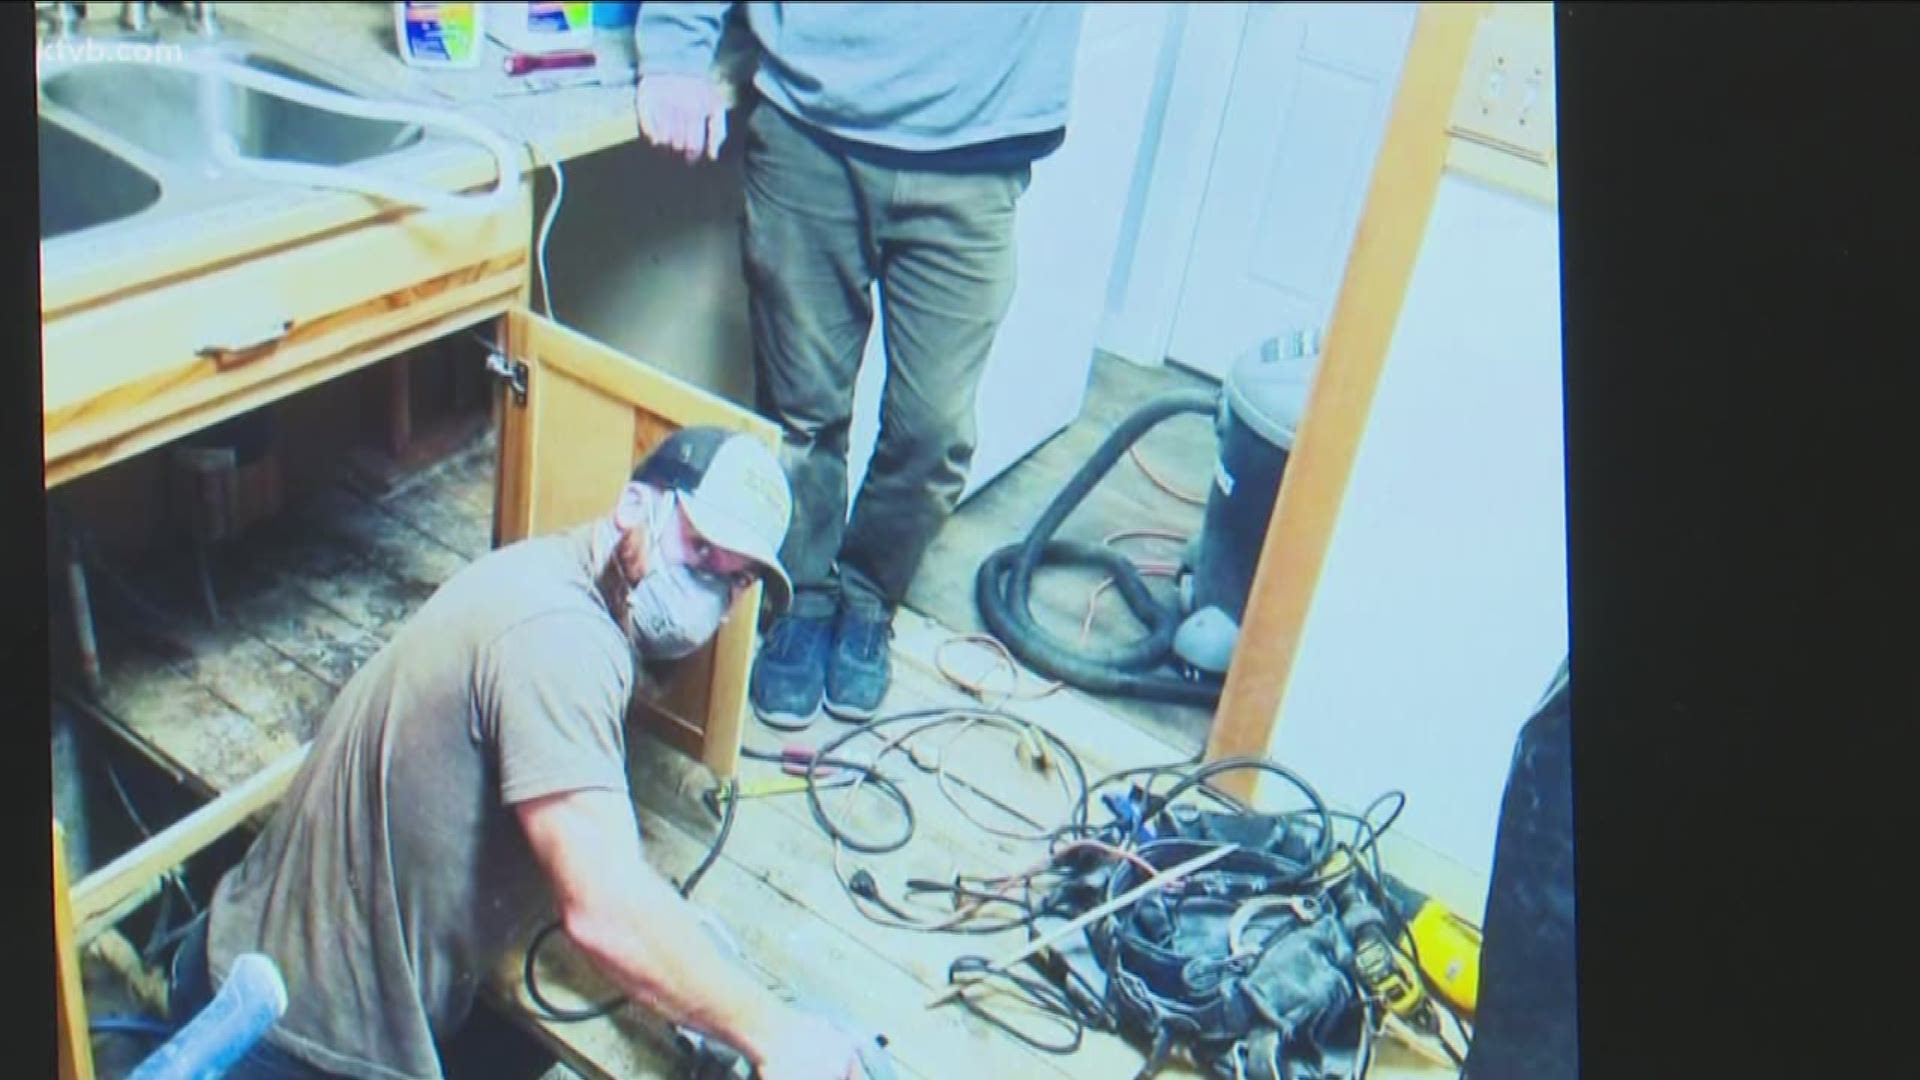 We spoke with one homeowner who was forced to spend thousands of dollars to repair damage to their kitchen.